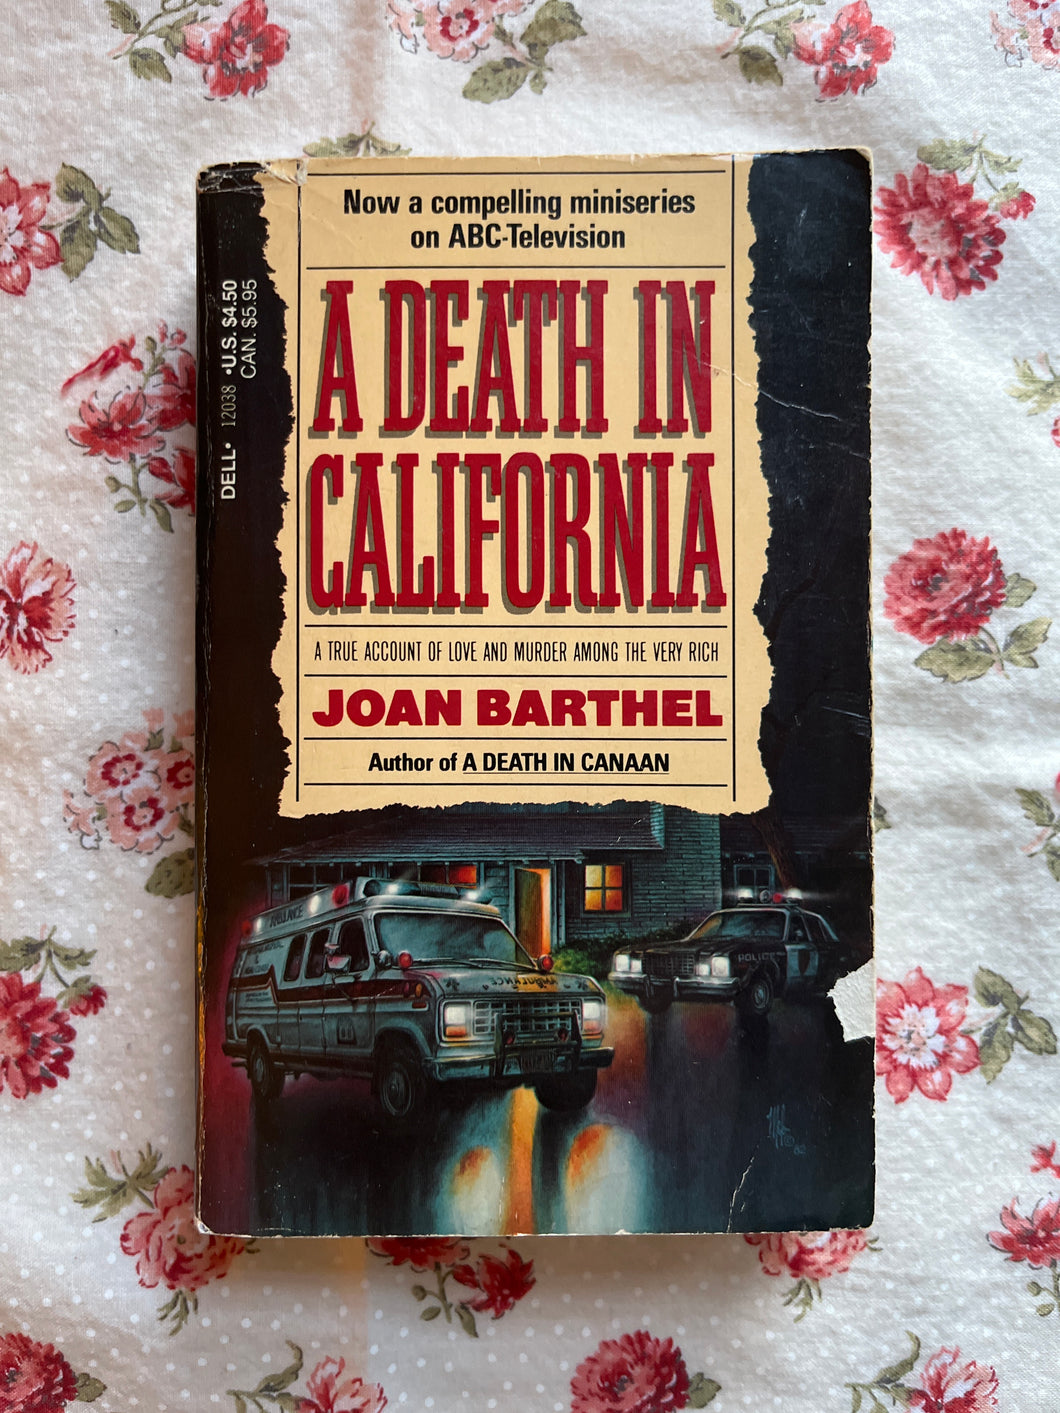 A Death In California: A True Account Of Love And Murder Among The Very Rich